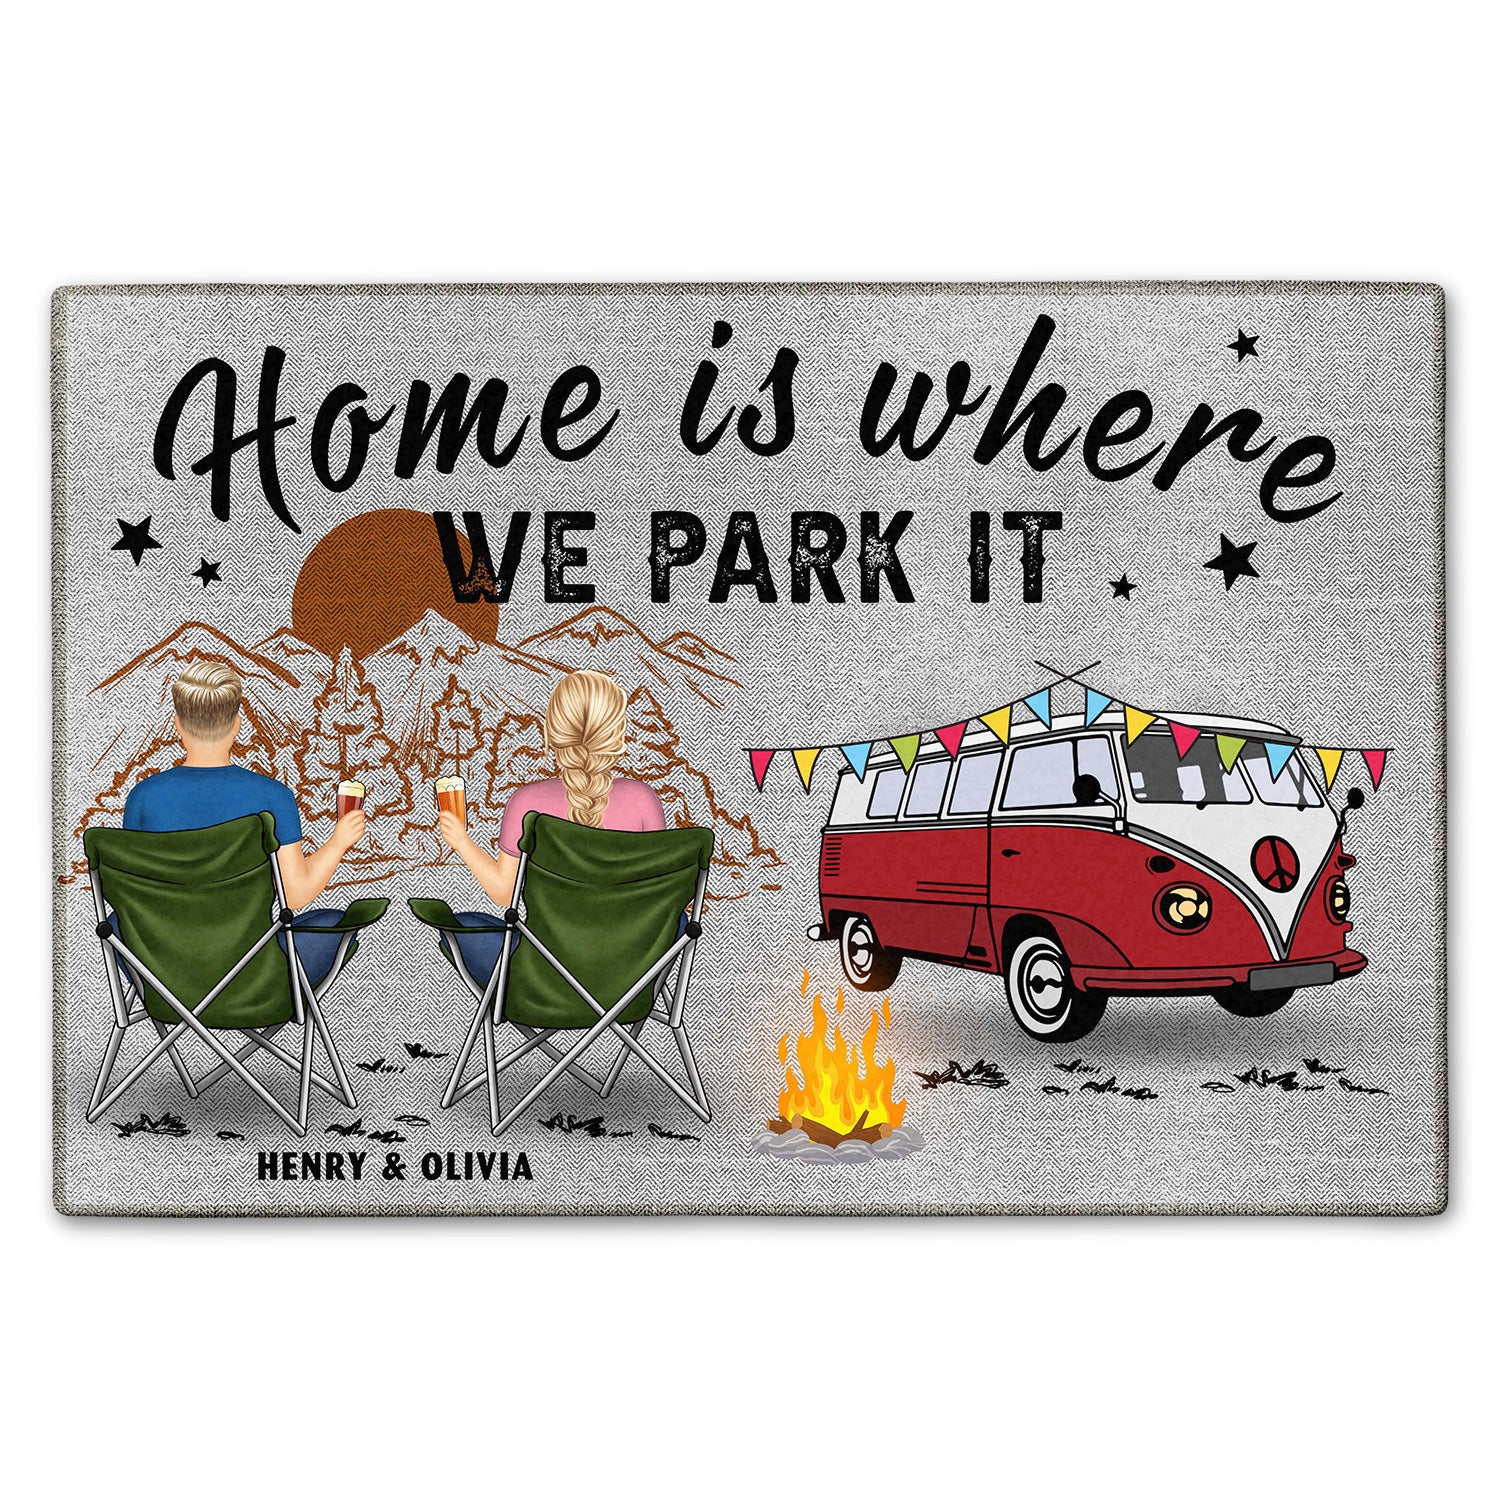 Making Memories One Campsite At A Time Back Couple - Gift For Camping Couples - Personalized Doormat